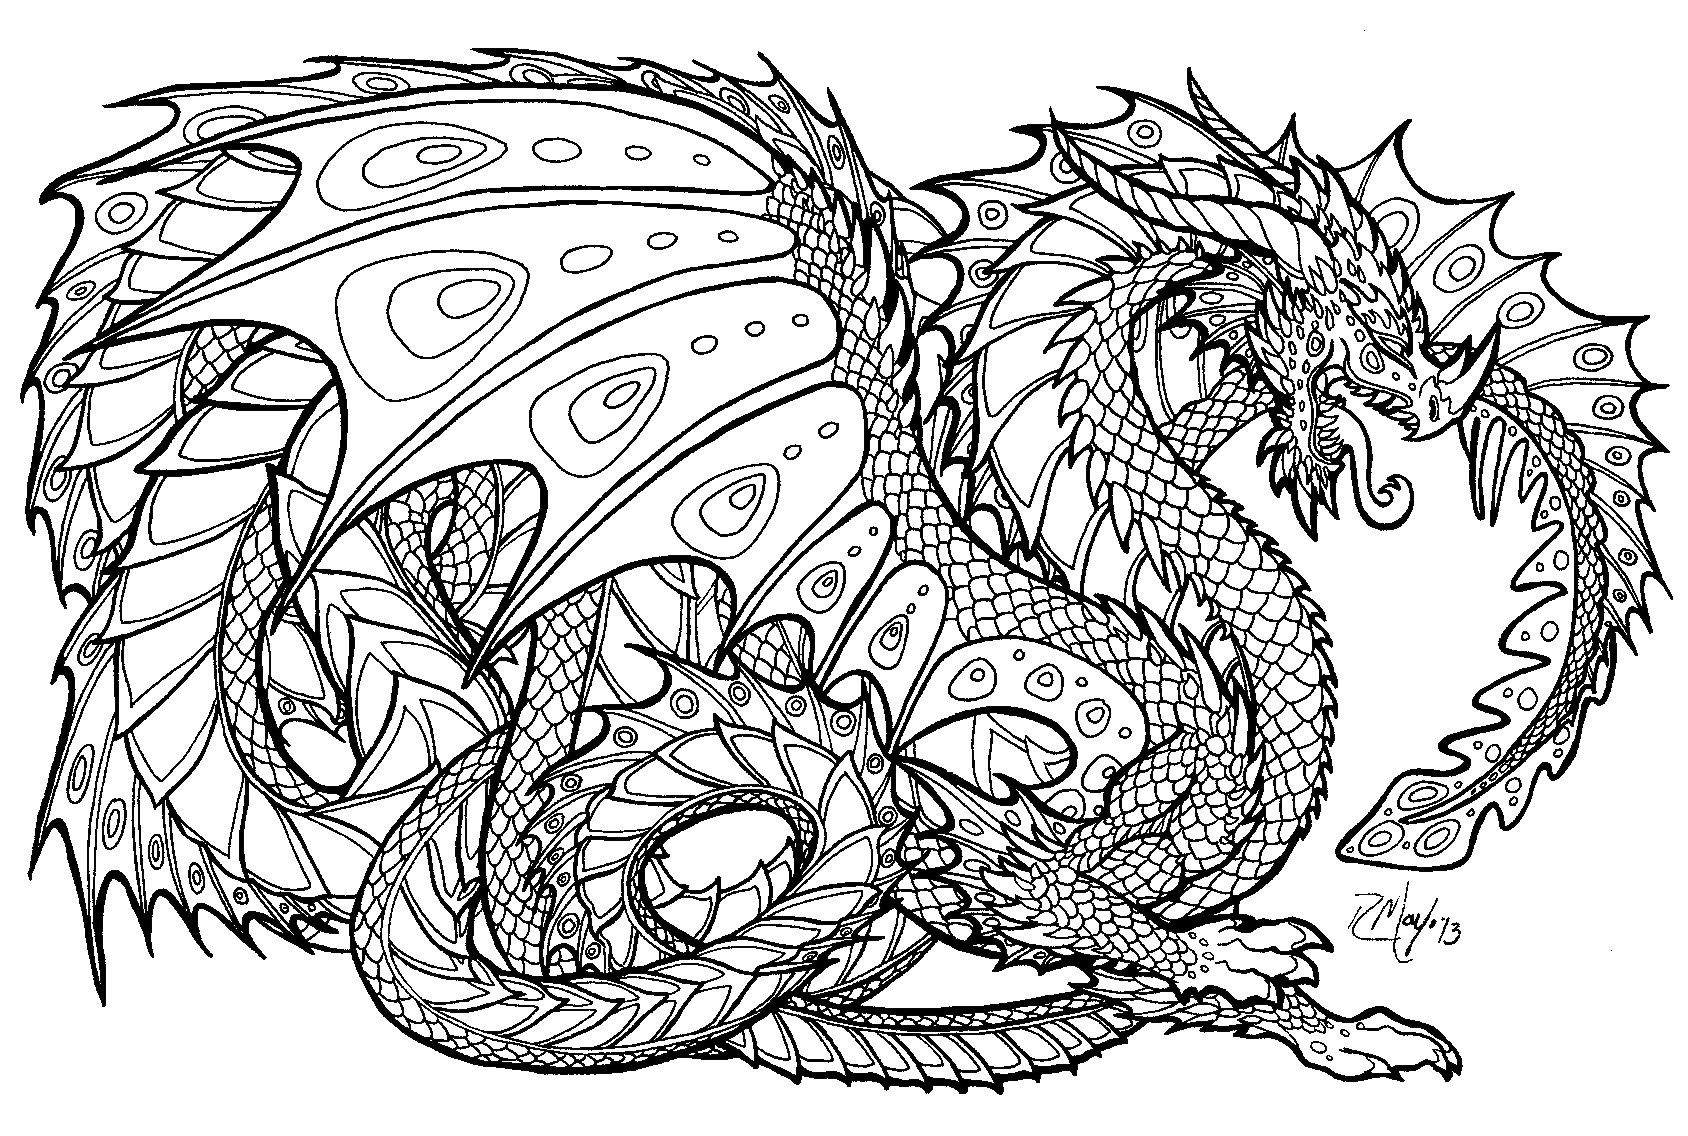 hard dragon coloring pages for adults